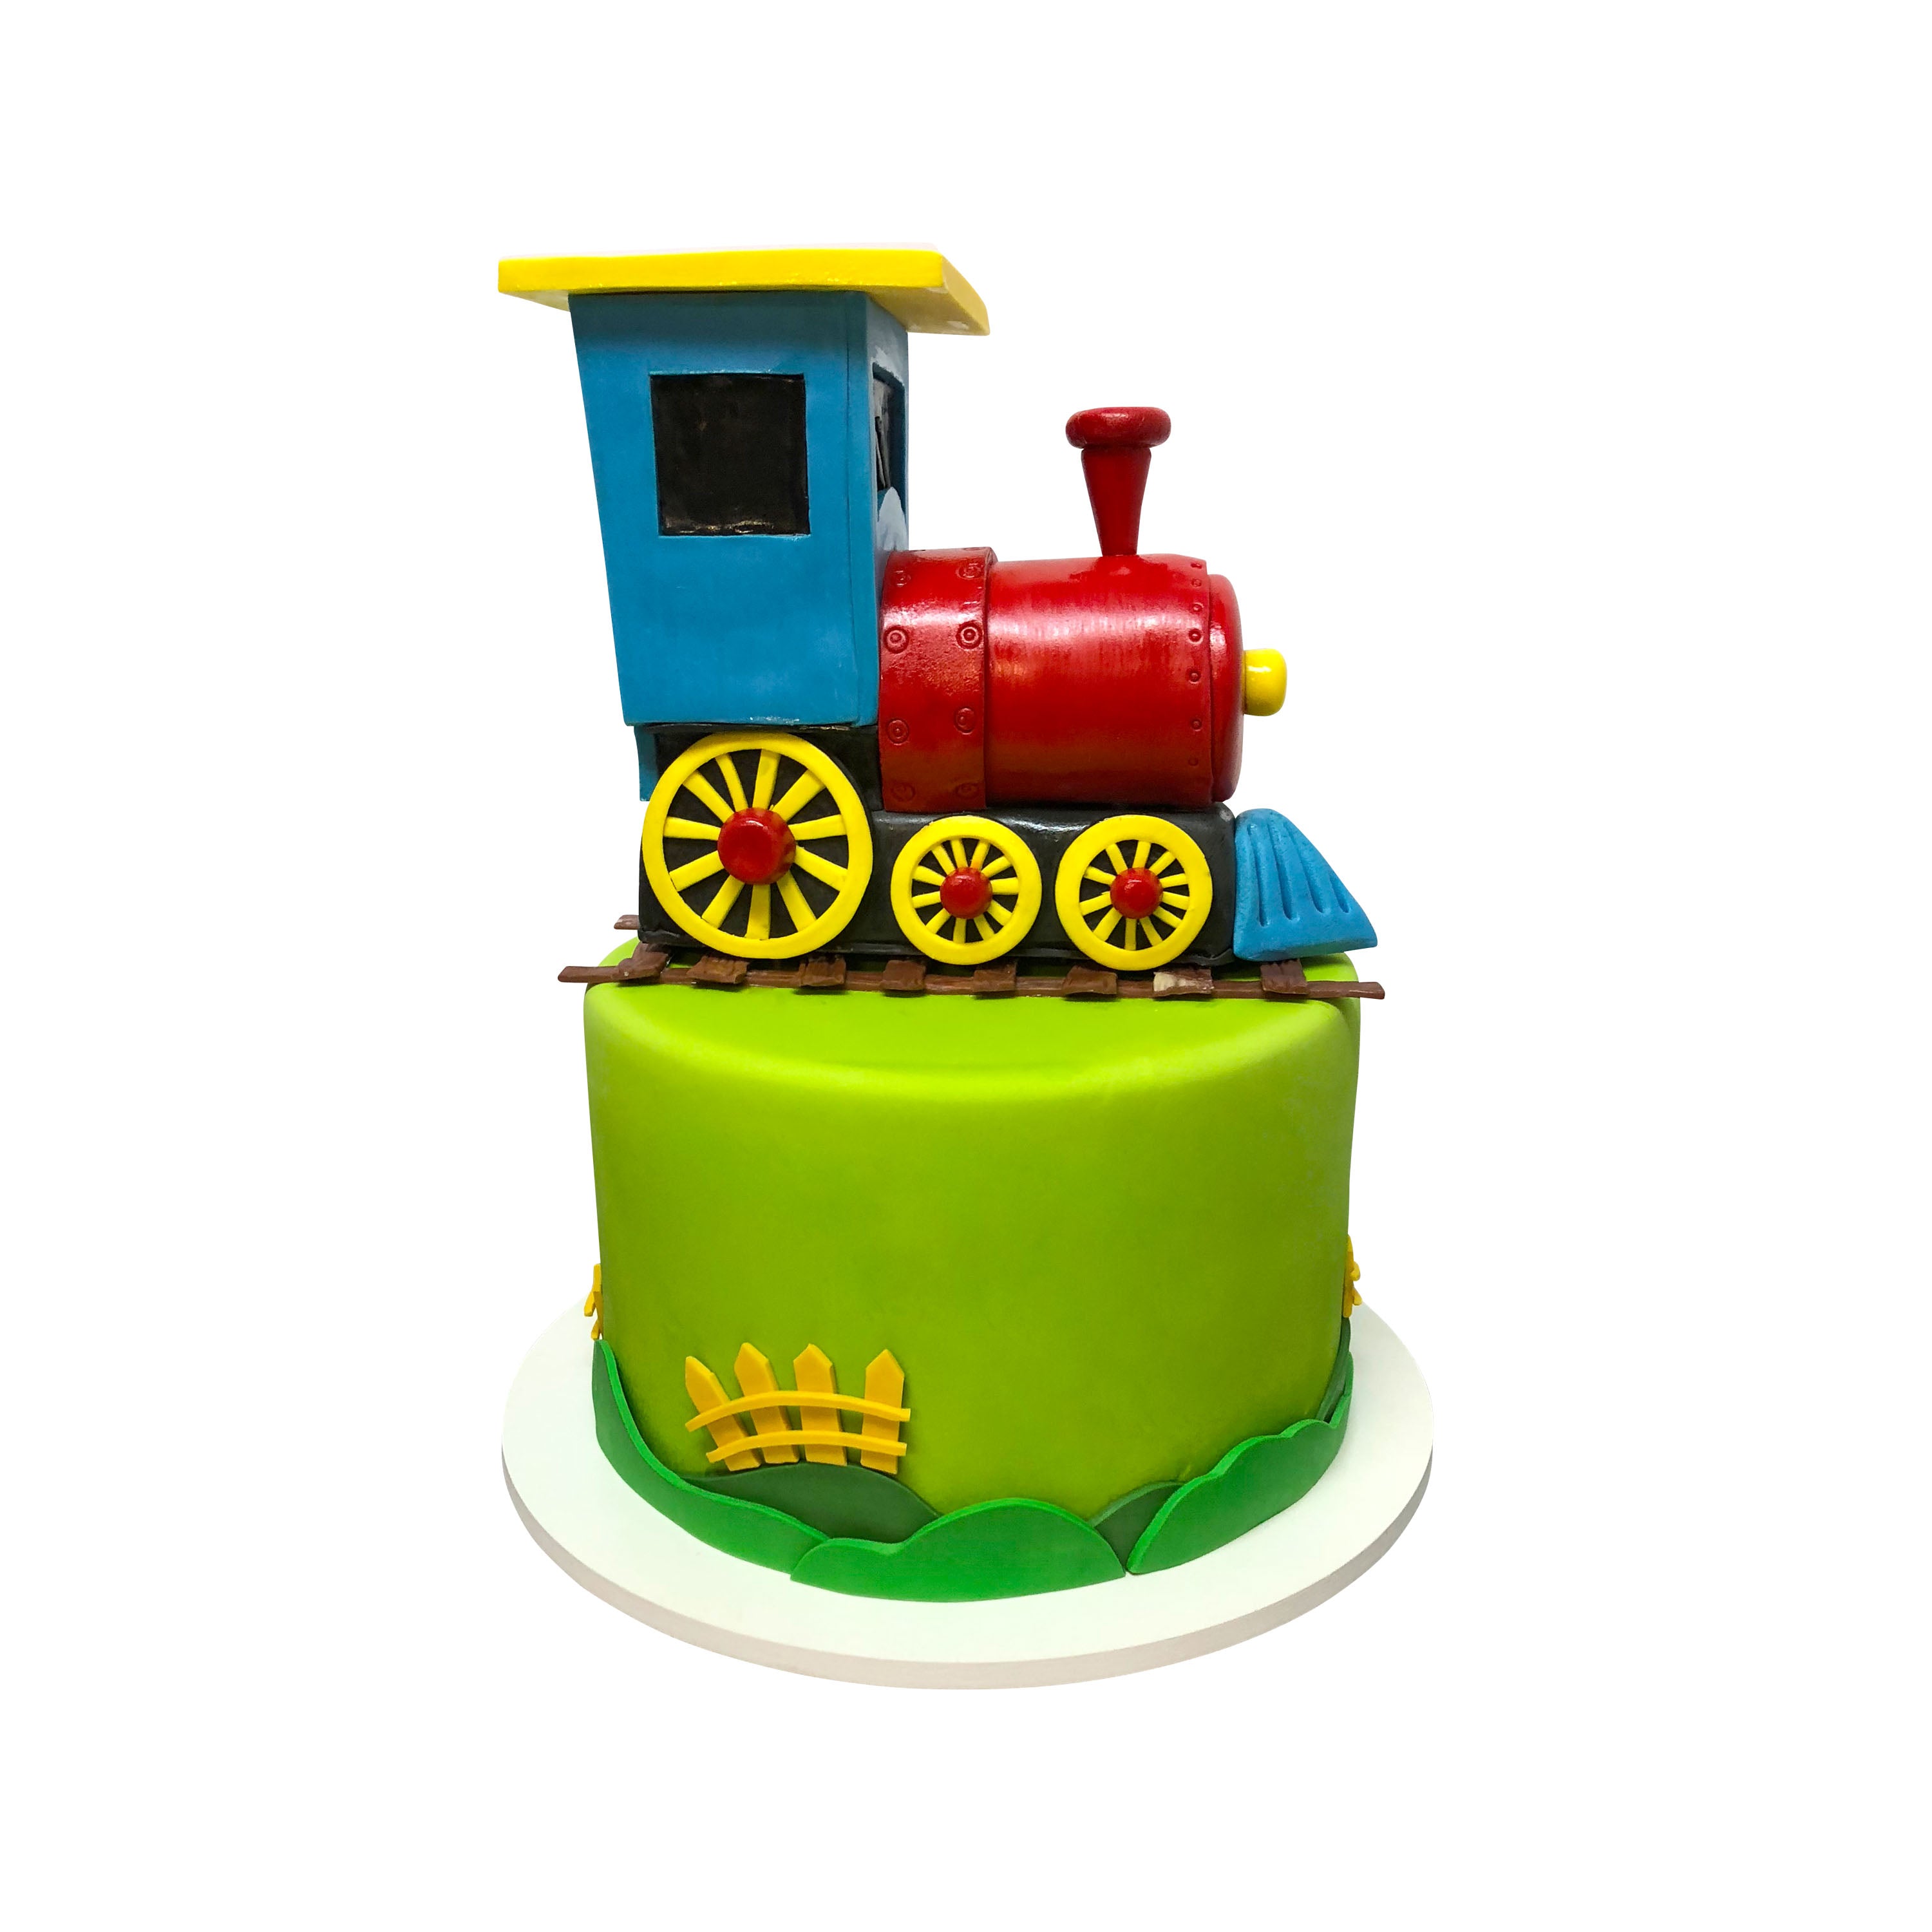 Amazon.com: Thomas & Friends Fisher-Price Birthday Wish Thomas, Musical  Push-Along Toy Train Engine with Light-up Birthday Cake for Toddlers and  preschoolers Ages 12 Months & Older : Toys & Games